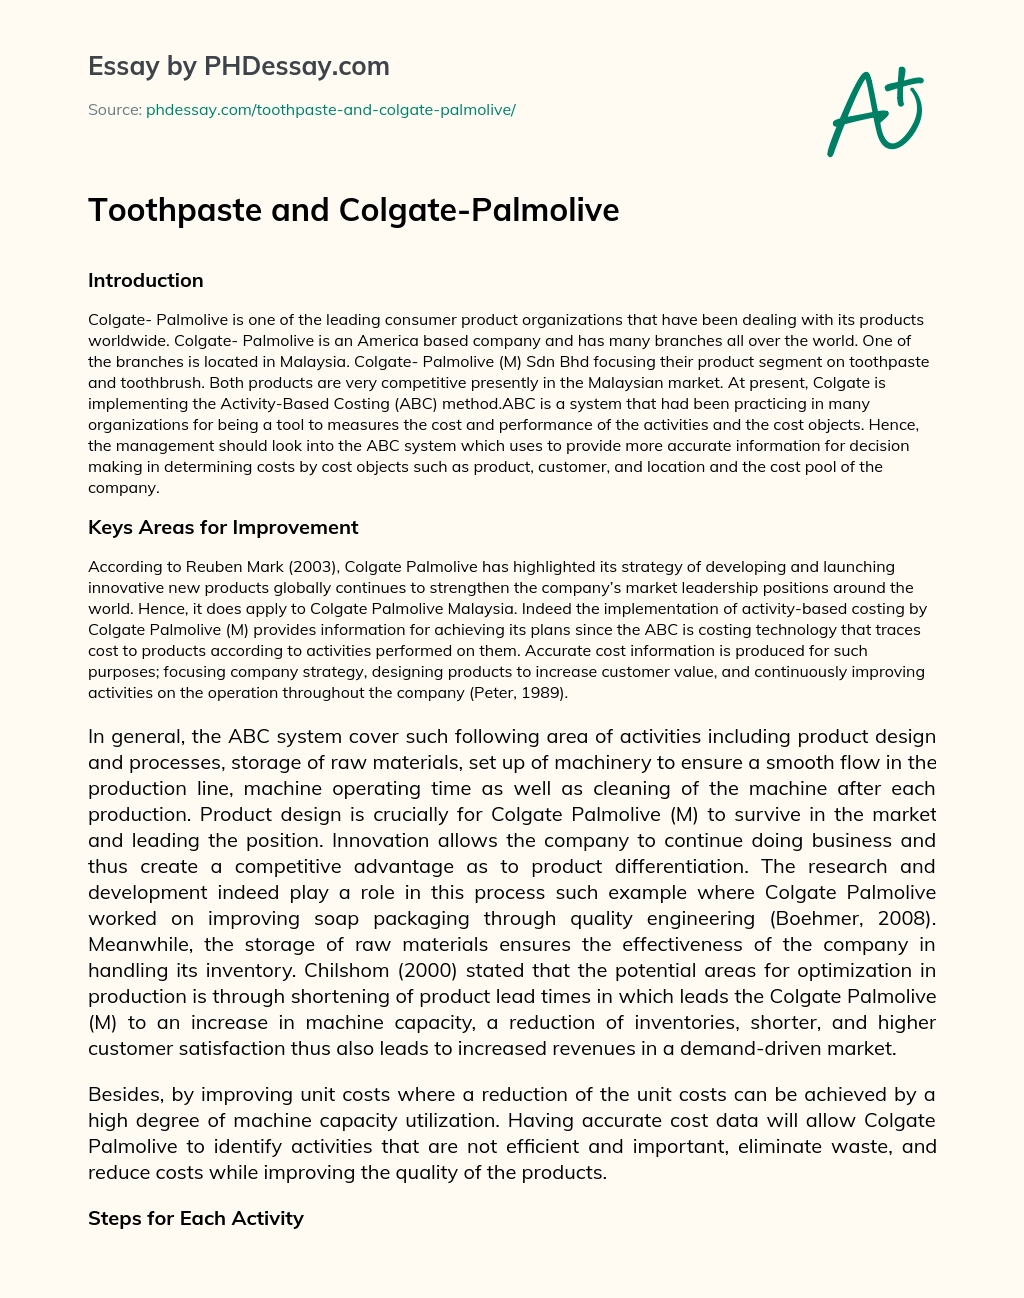 Toothpaste and Colgate-Palmolive essay